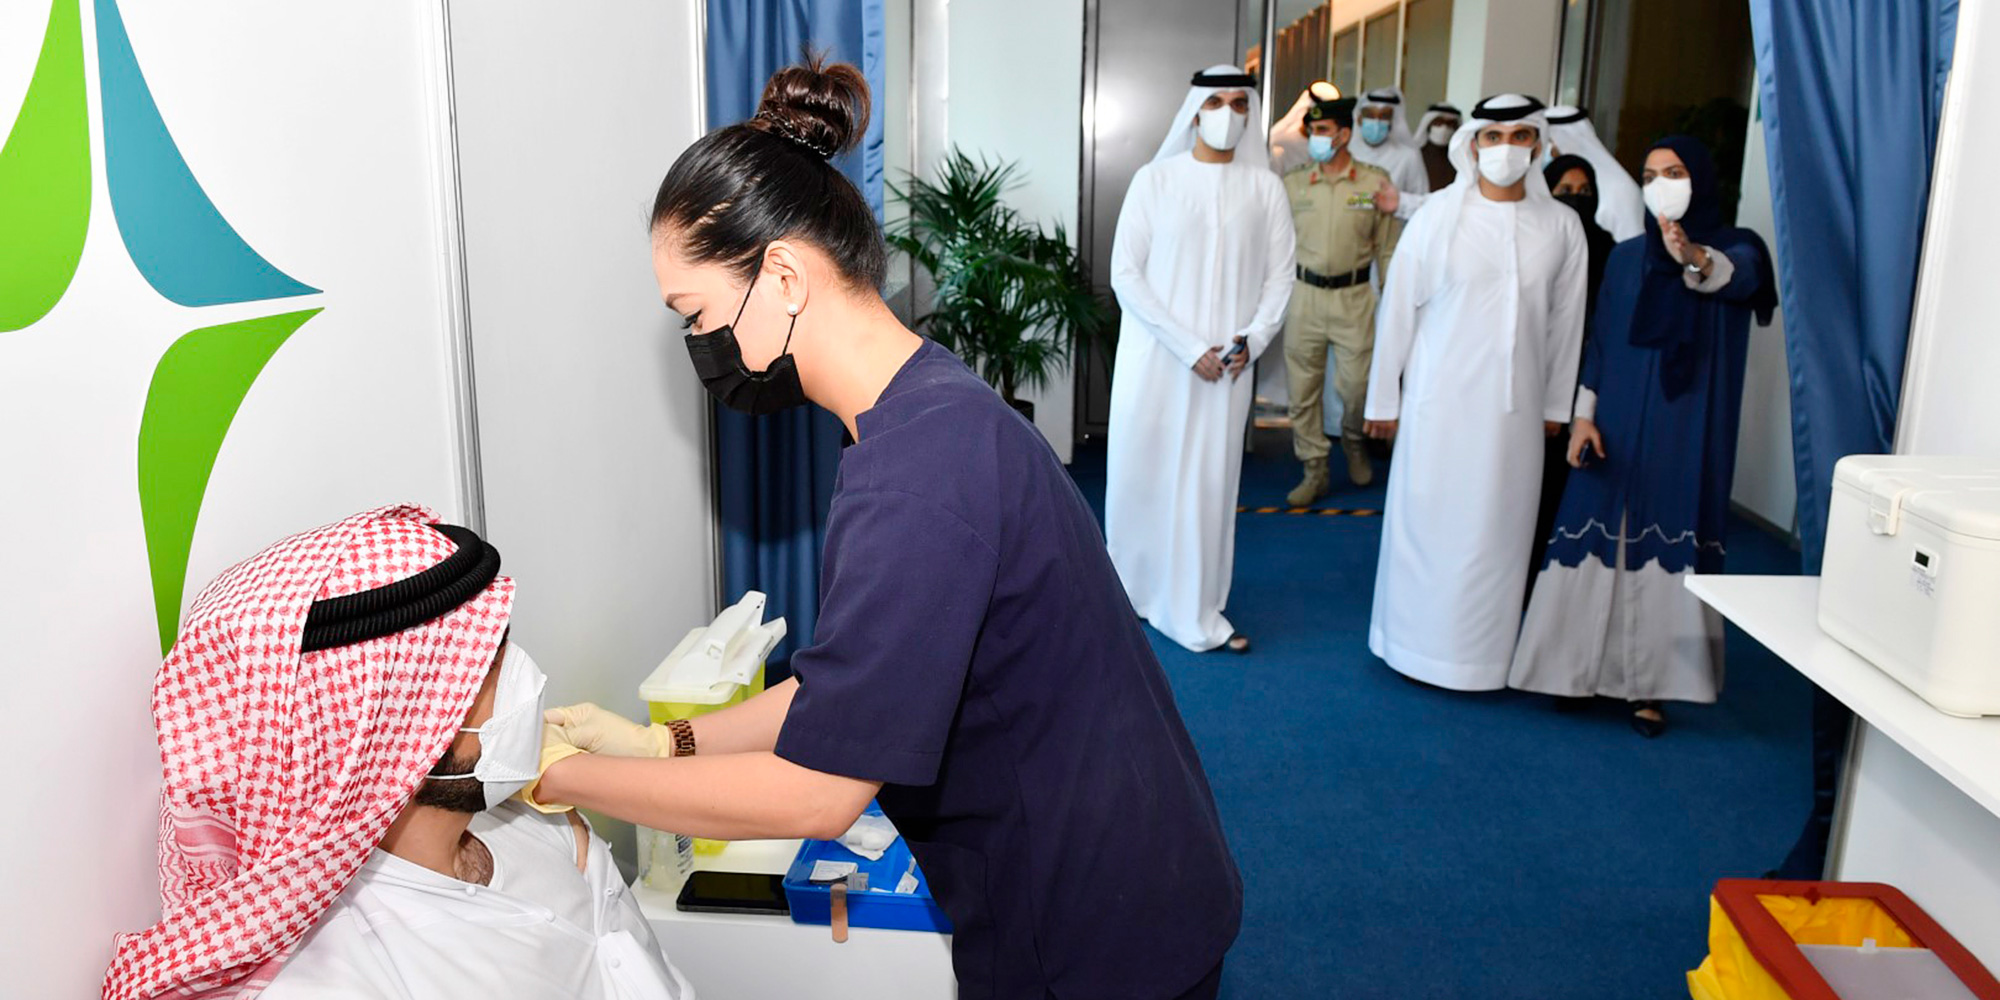 Sheikh Mansoor is briefed on the vaccination drives organized by health care centres in Dubai